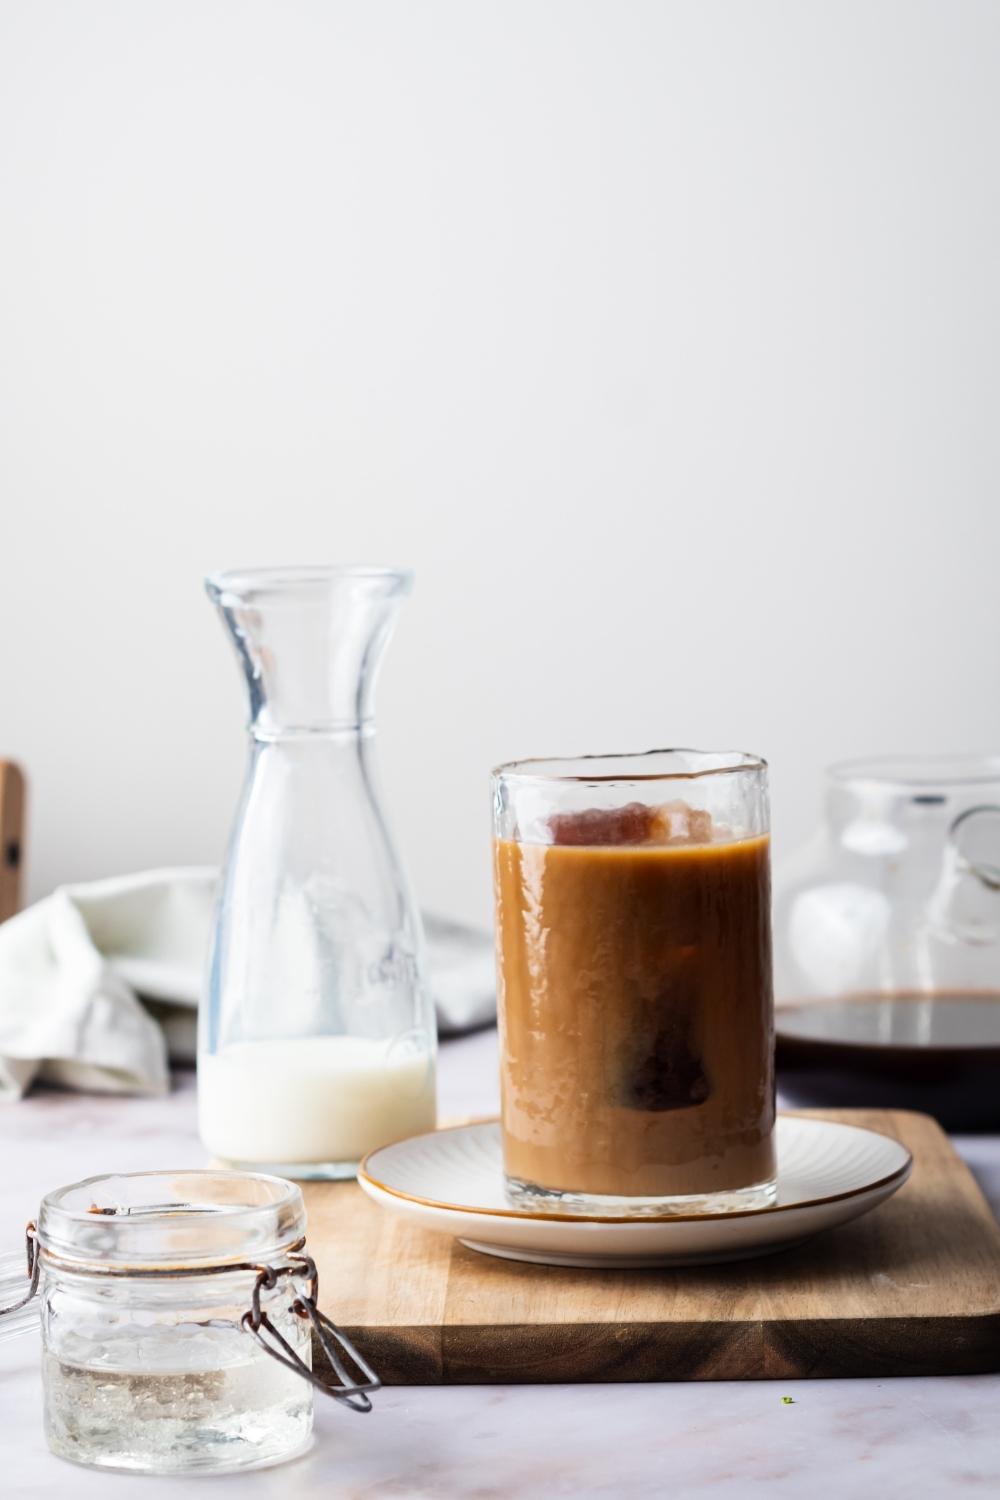 A glass containing iced coffee on a saucer and a pitcher with half and half behind it.